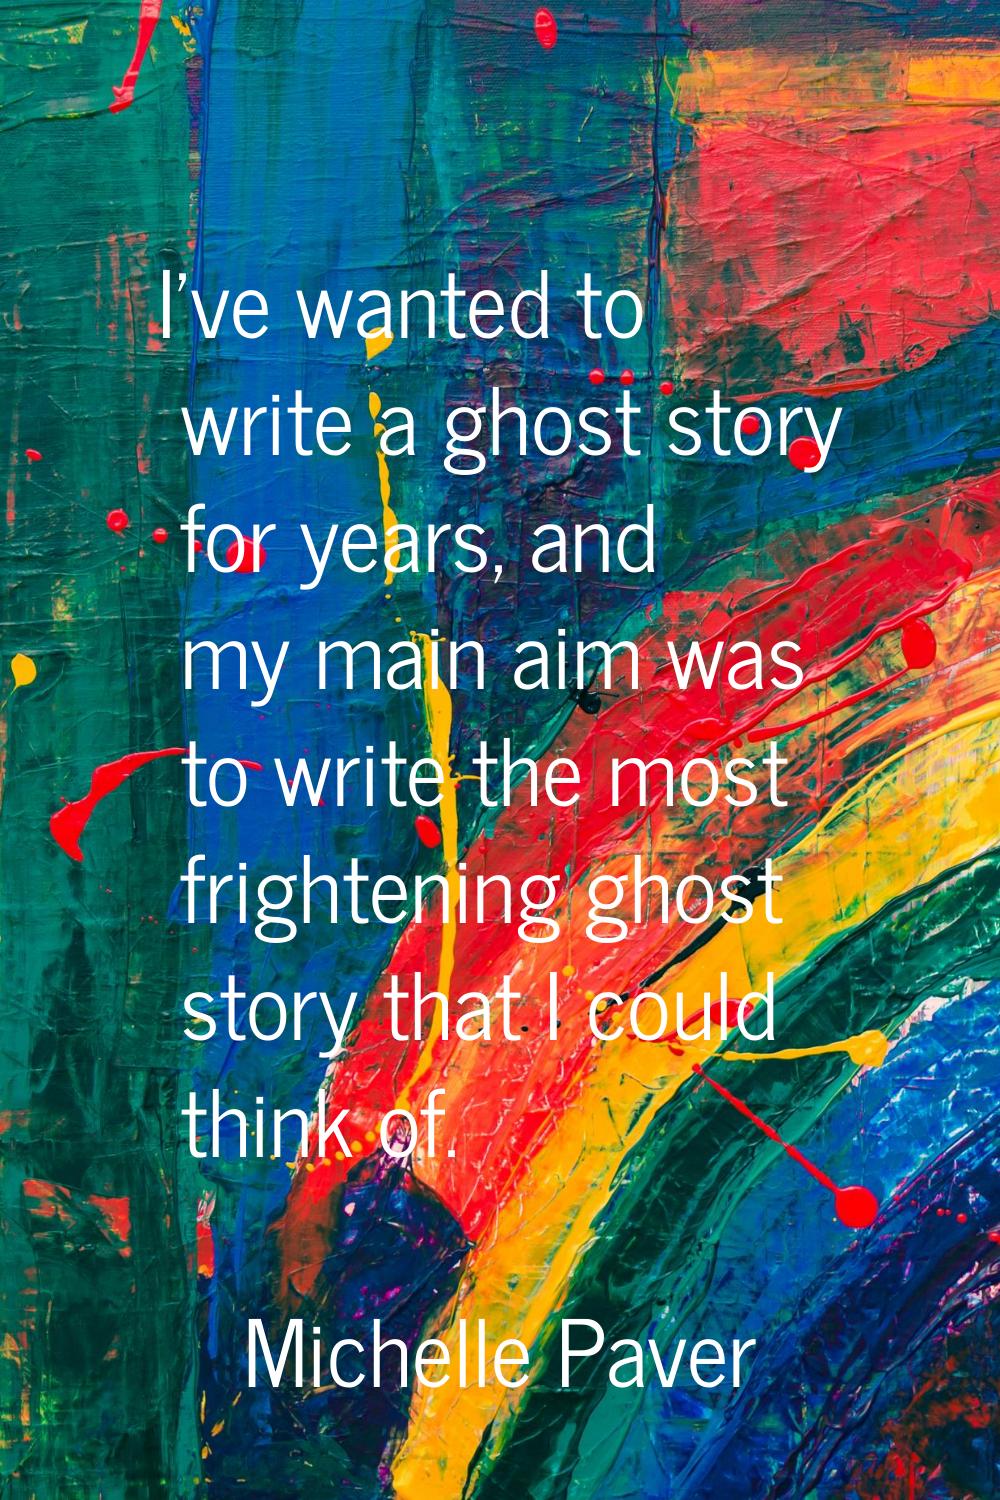 I've wanted to write a ghost story for years, and my main aim was to write the most frightening gho